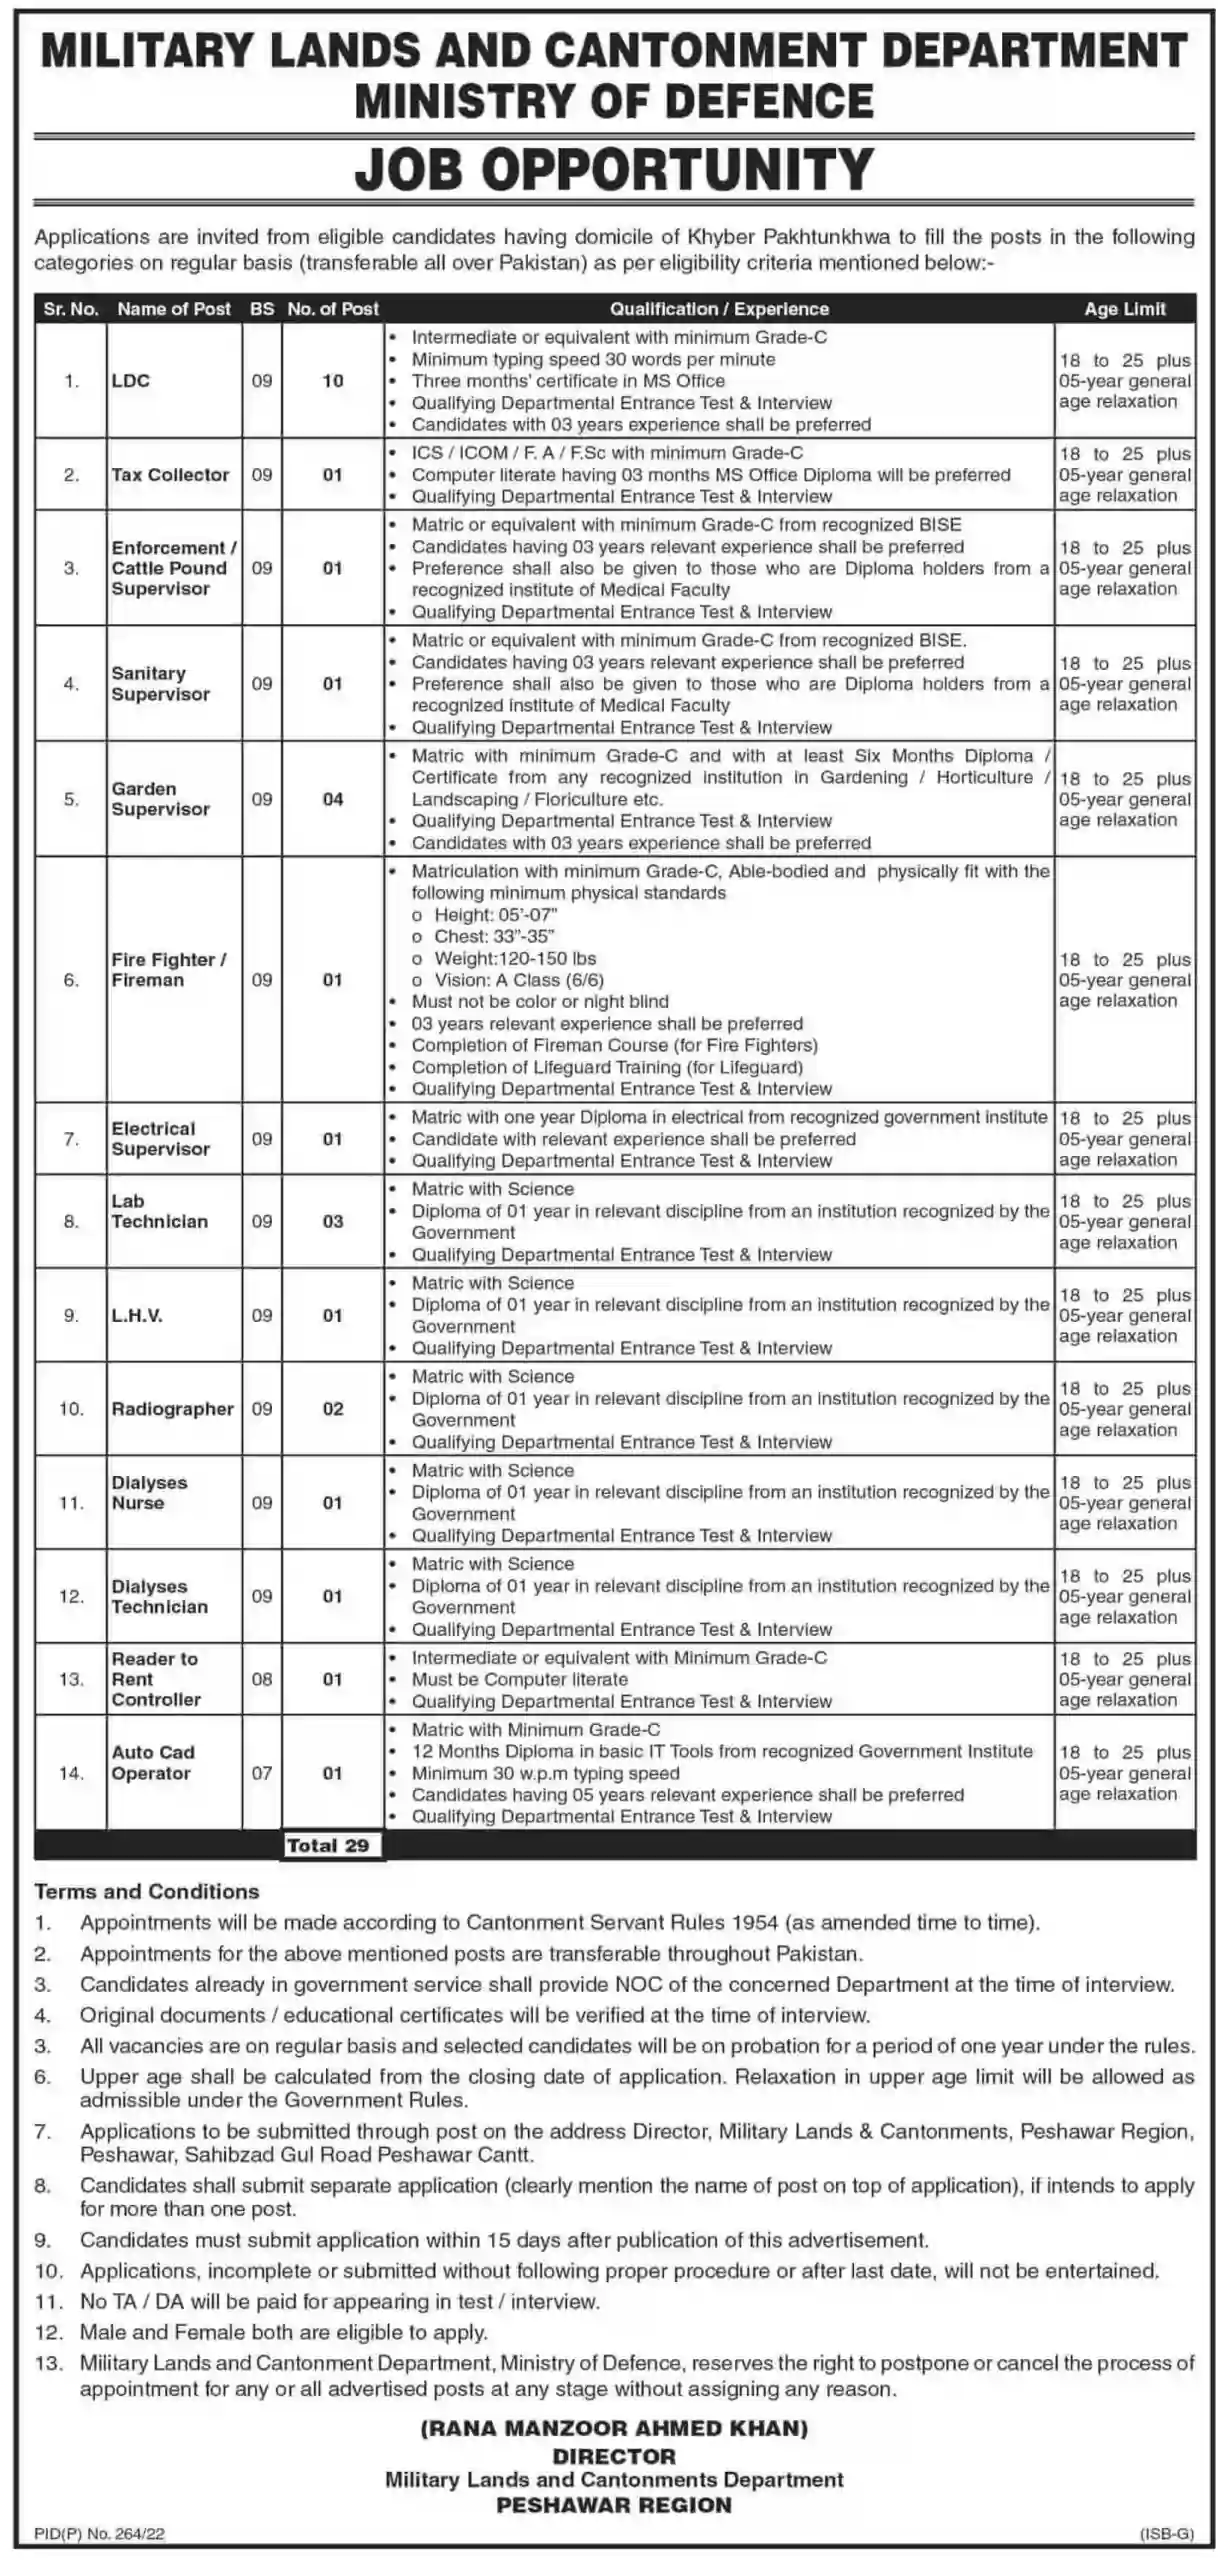 Ministry of Defence Jobs (MOD) Apply Now